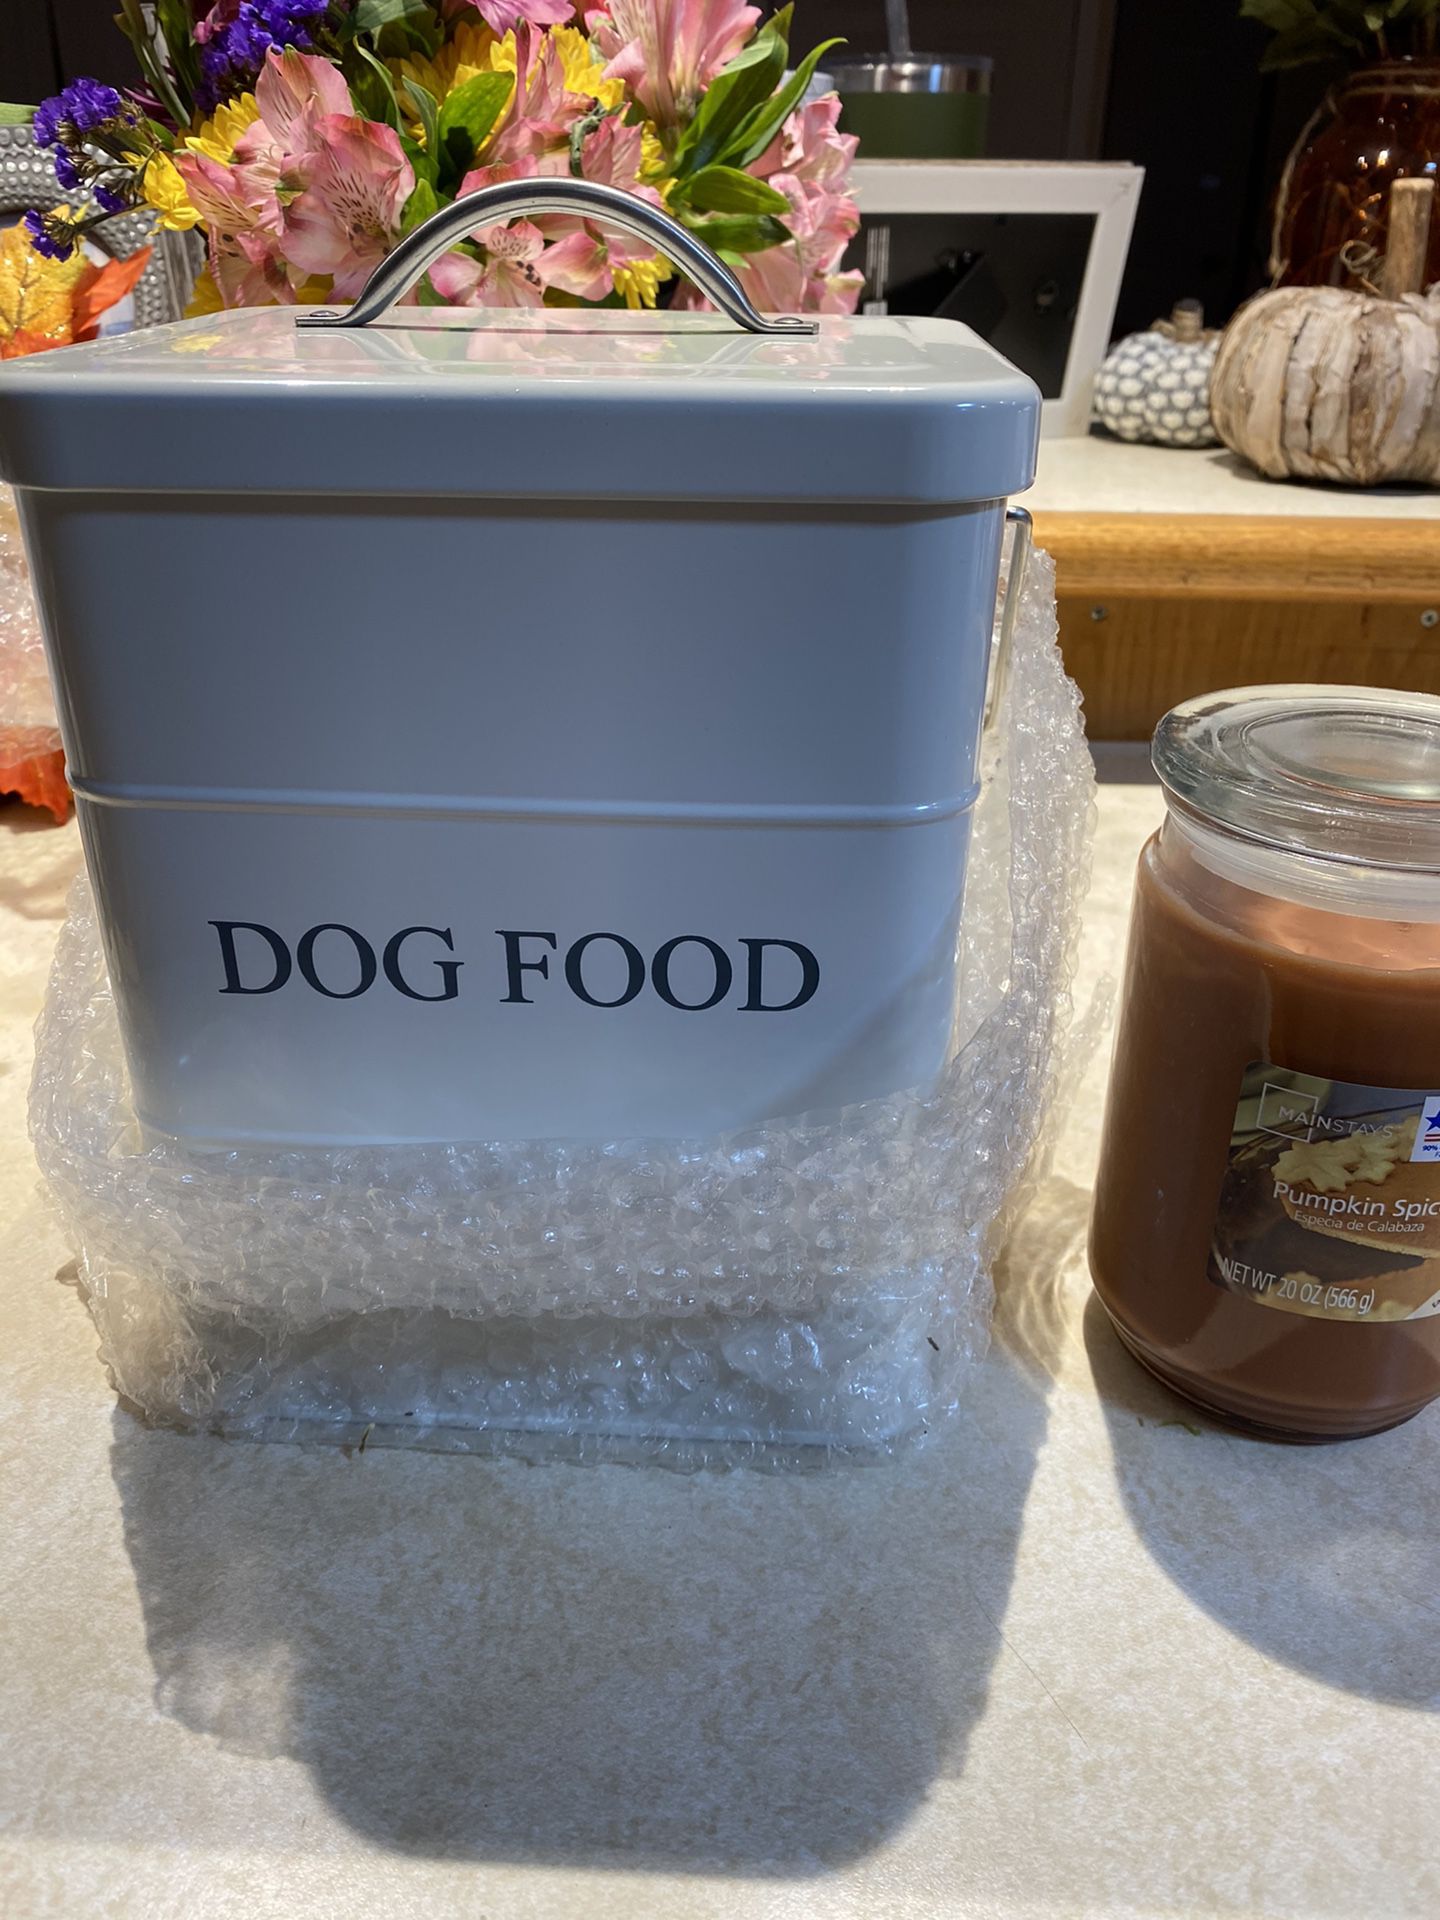 Dog food/treat container